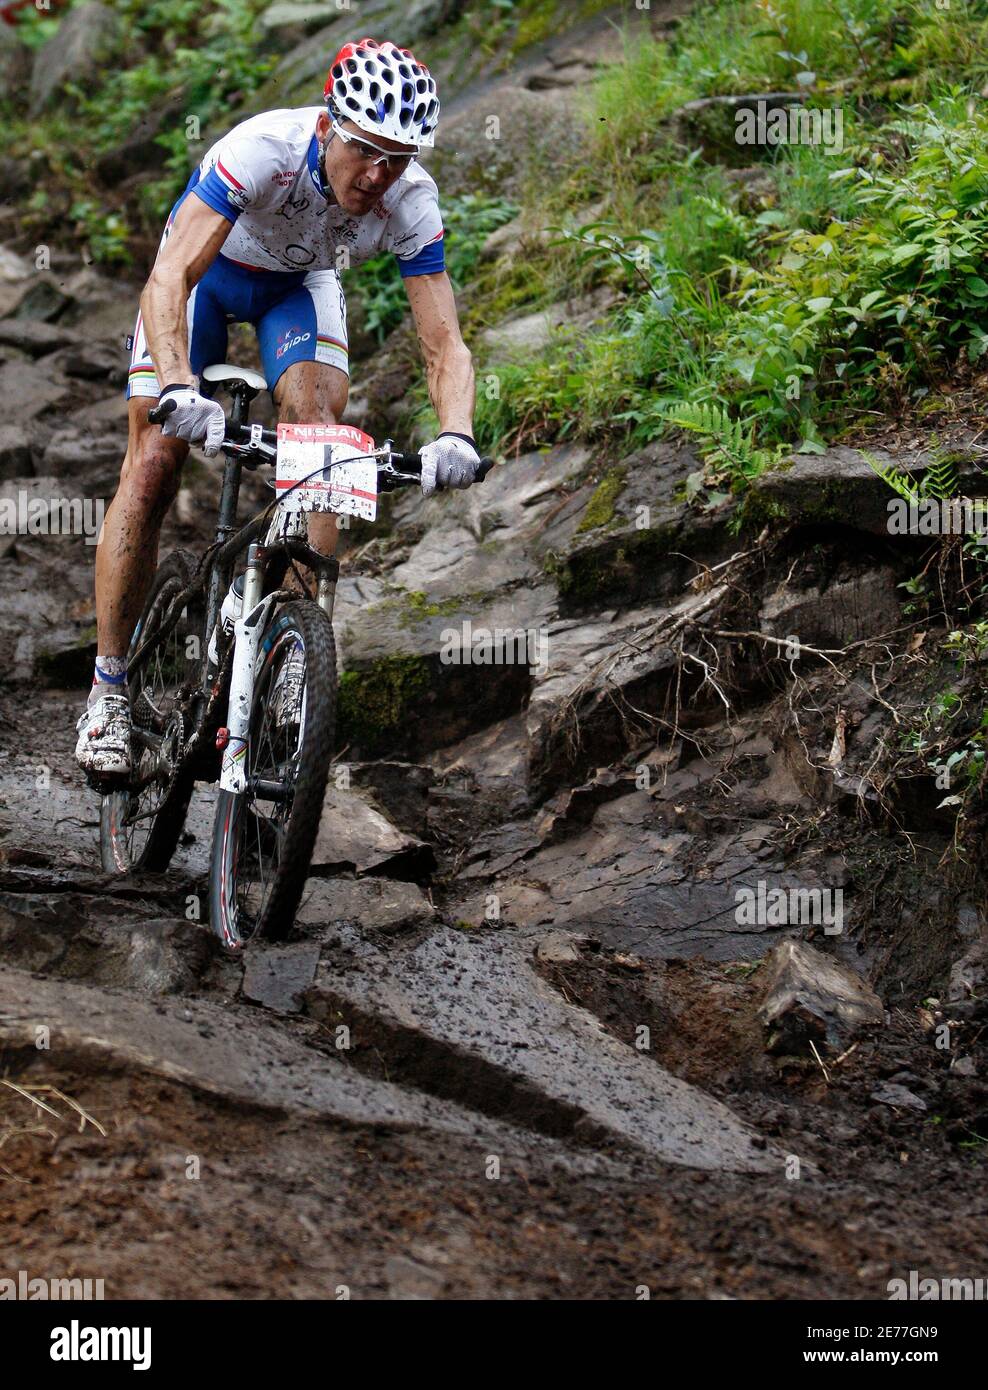 France's Julien Absalon cycles during the men's UCI Mountain Bike World Cup competition at Ste-Anne in Beaupre, July 26, 2009. Absalon won the competition. REUTERS/Mathieu Belanger (CANADA SPORT CYCLING Stock